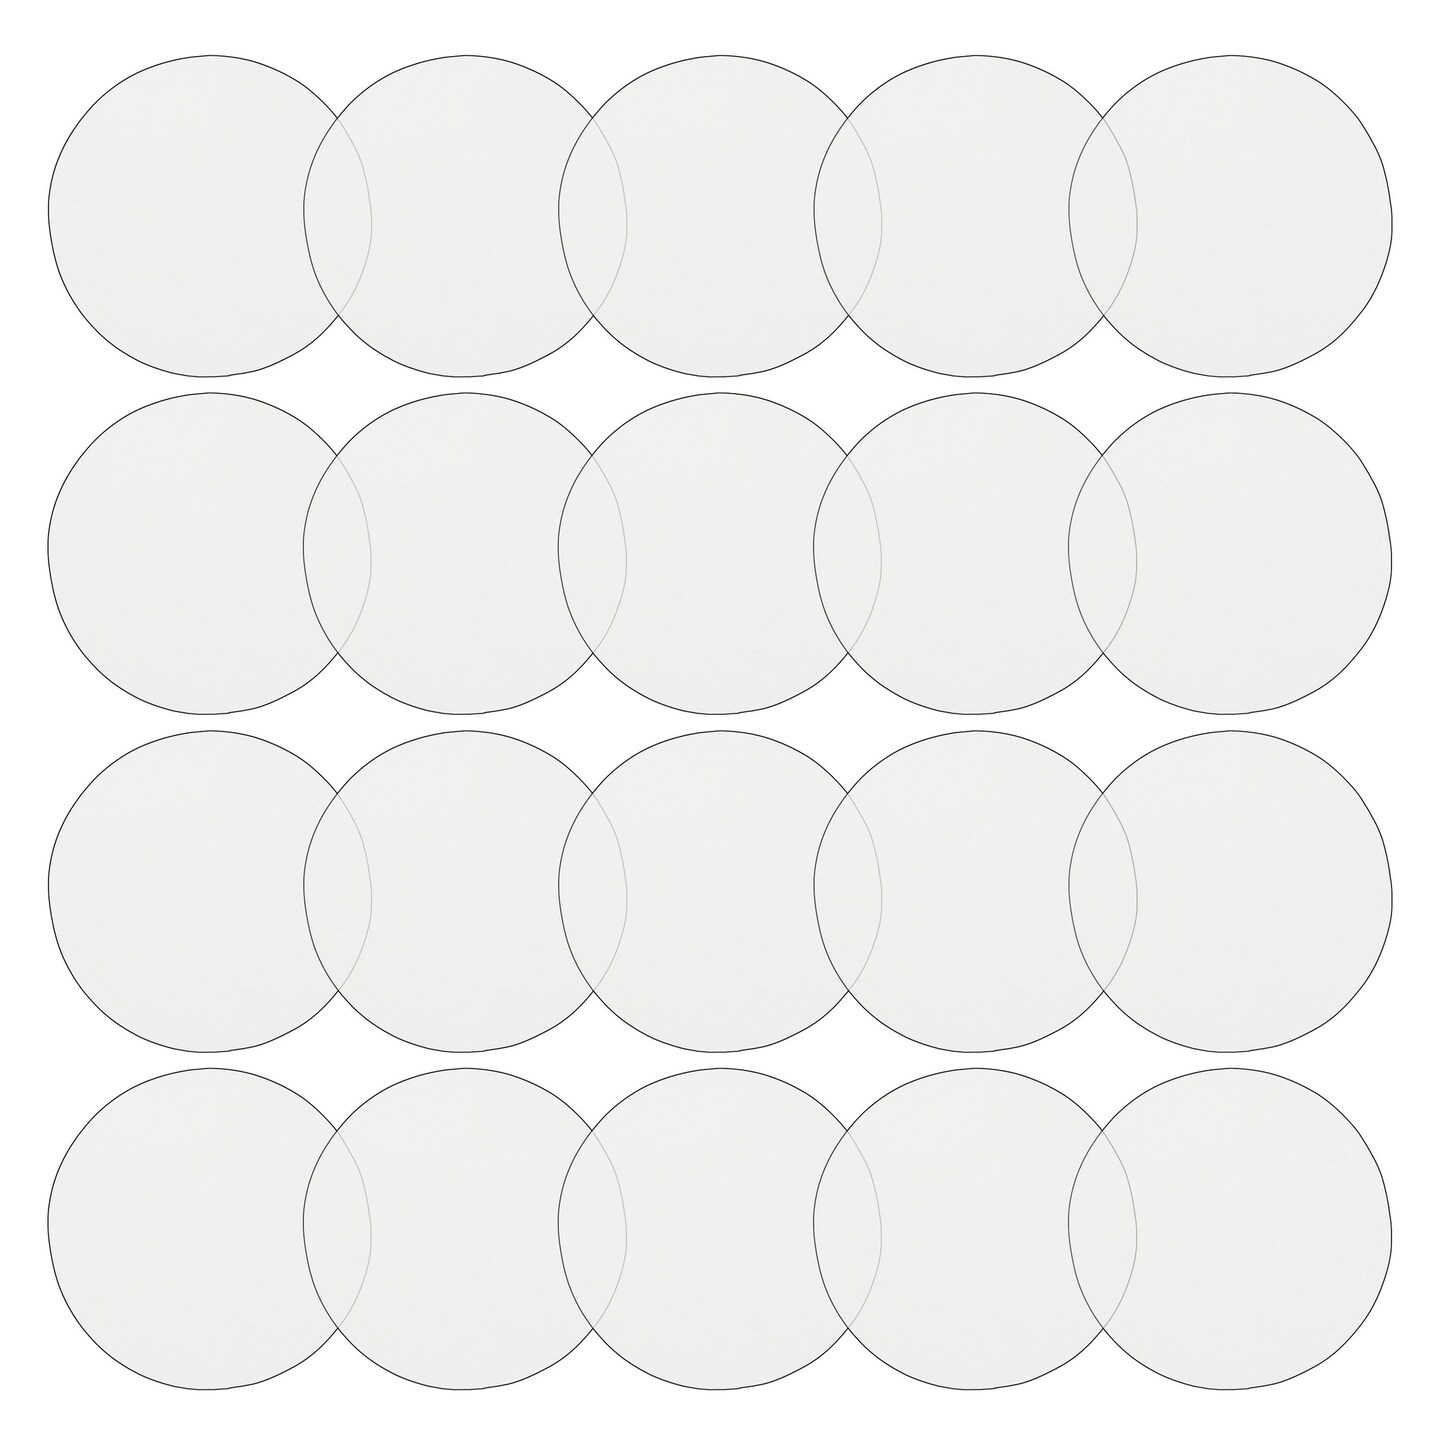 1/8 Thick Clear Acrylic Circles - 1 - 11 Gloss on both sides - For  Crafts, figure bases, templates, and more!